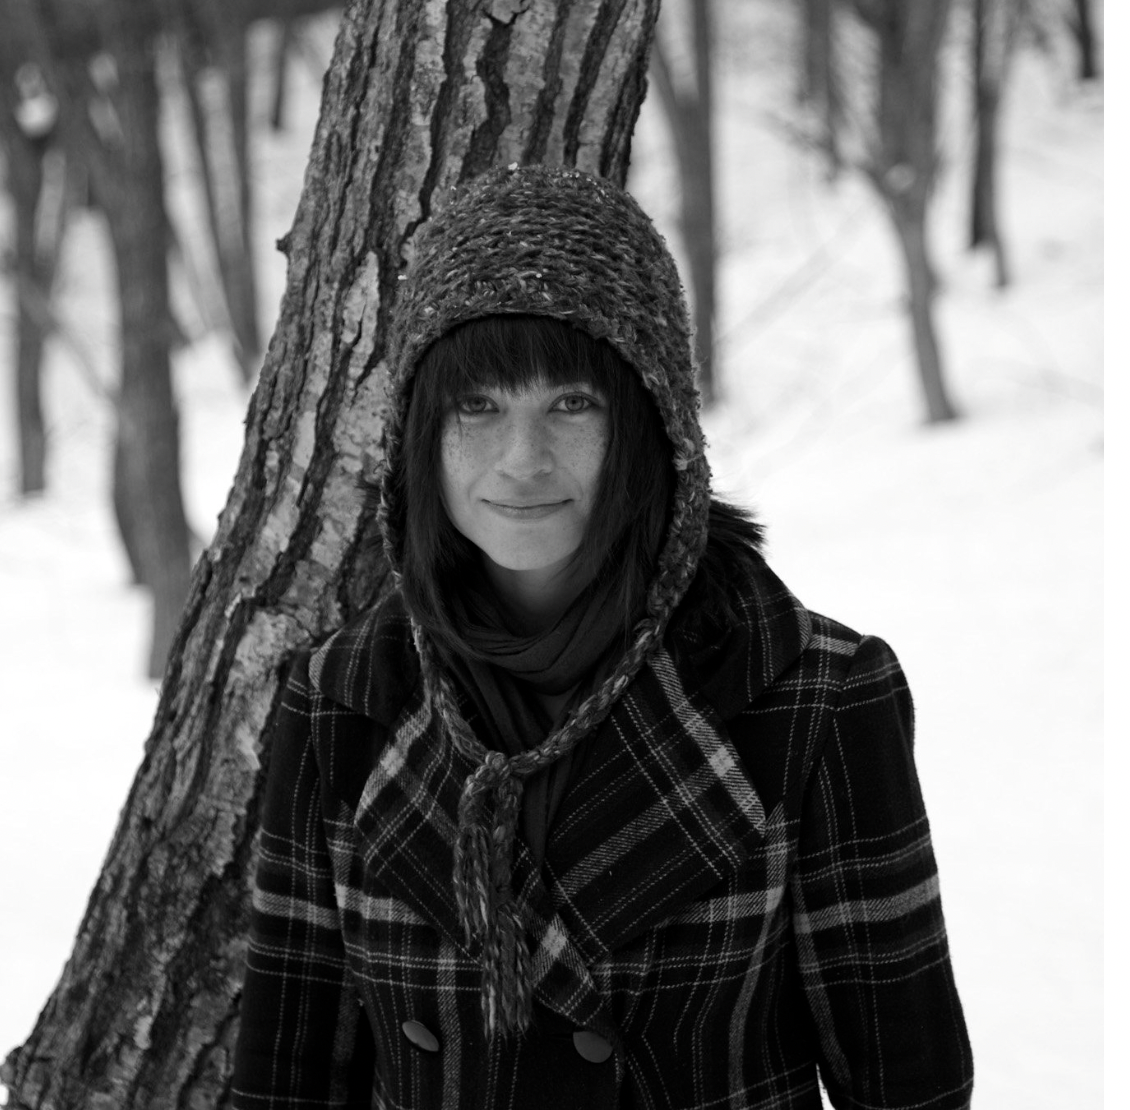 A black and white photo of Amanda wearing a beanie and plaid coat in a snowy environment.